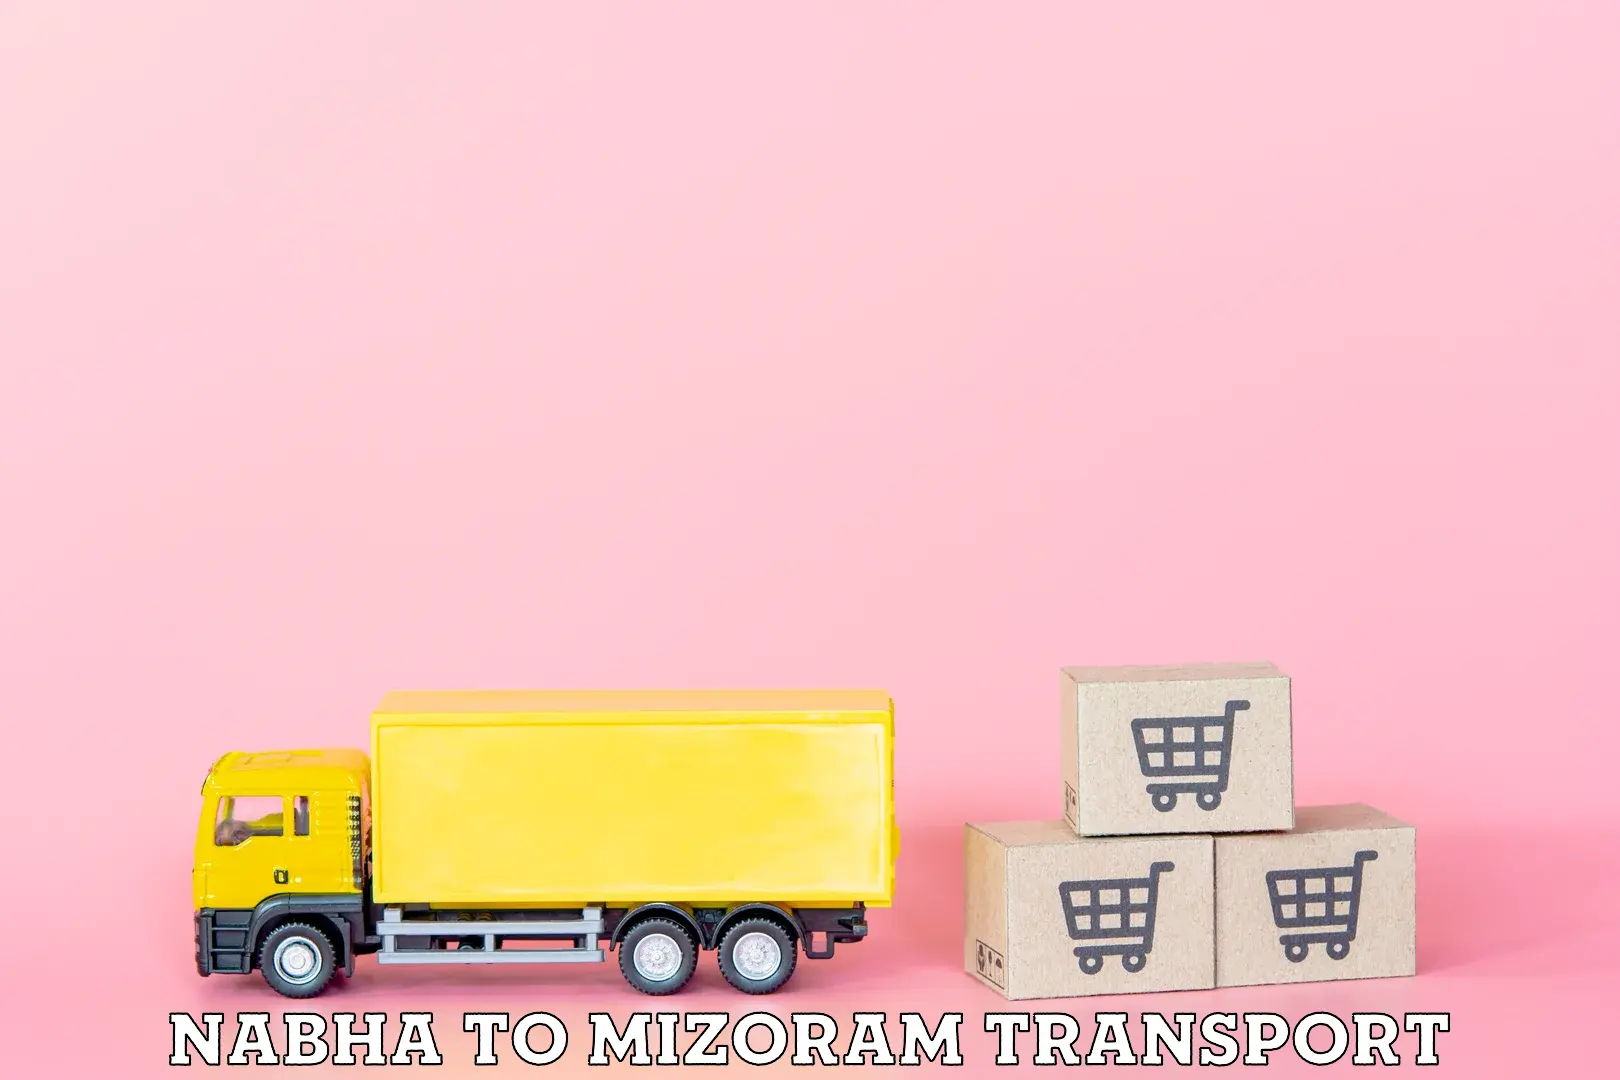 Transport bike from one state to another Nabha to Mizoram